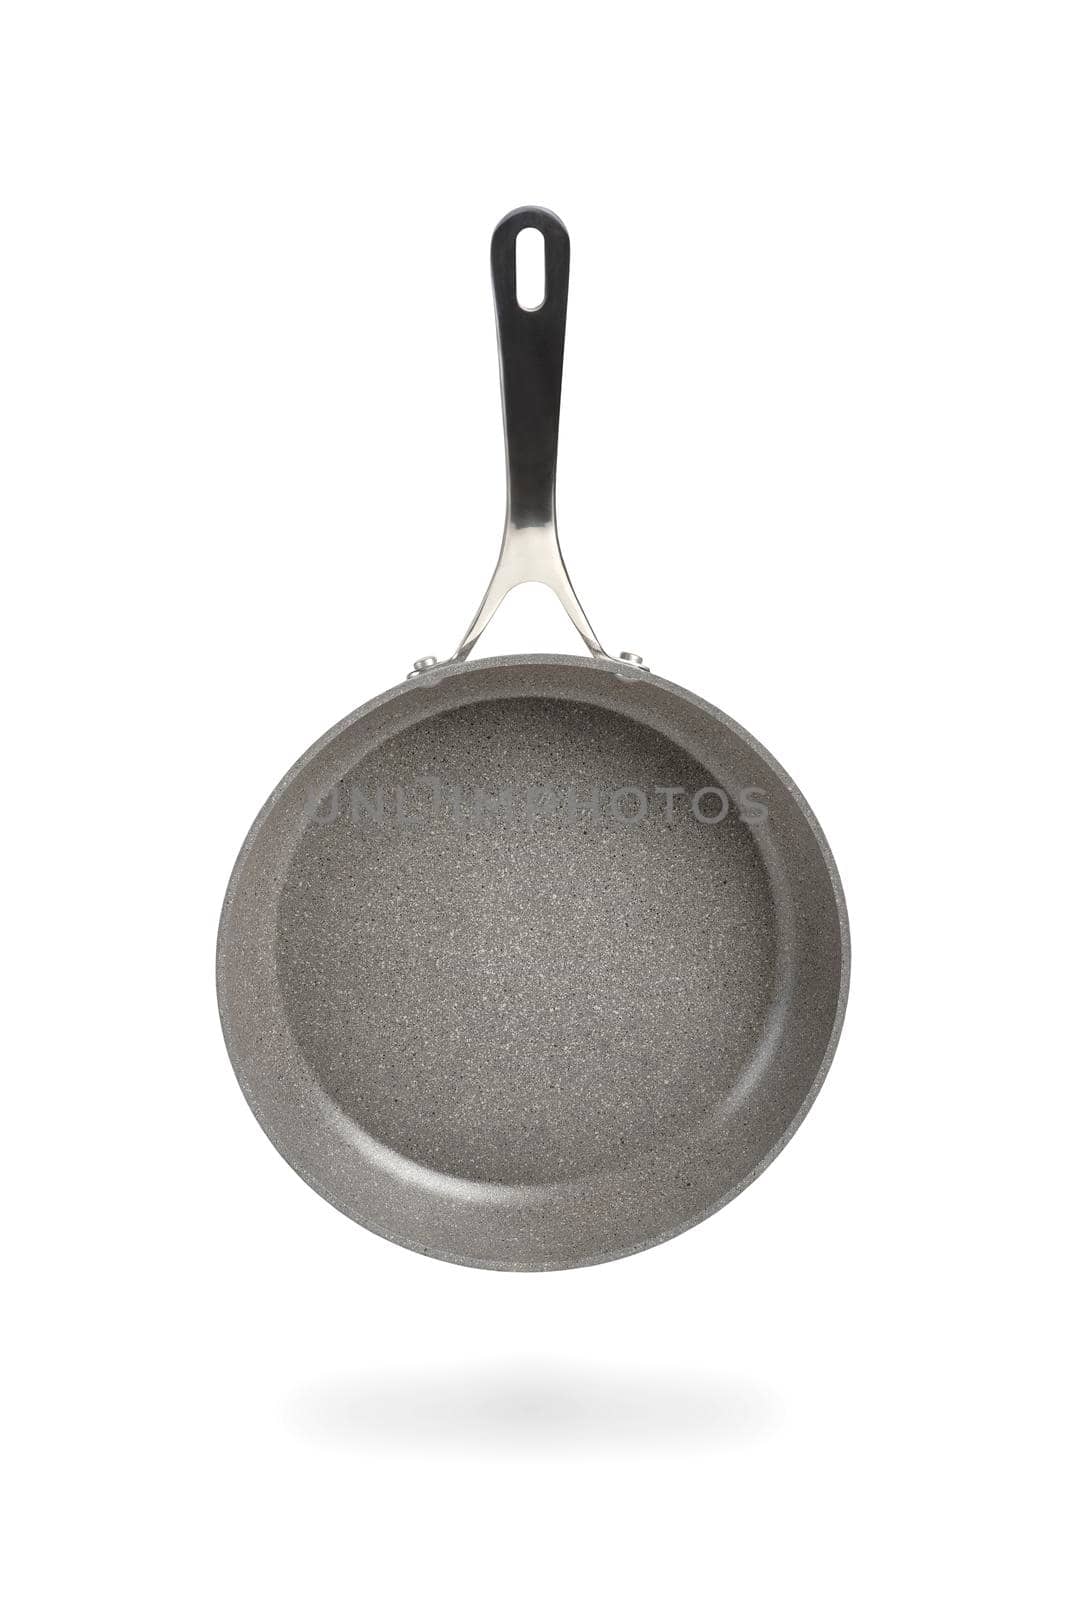 Black frying pan isolated on white background. Frying pan with non-stick coating.Non-stick frying pan made of titanium and granite. Isolate with shadow.